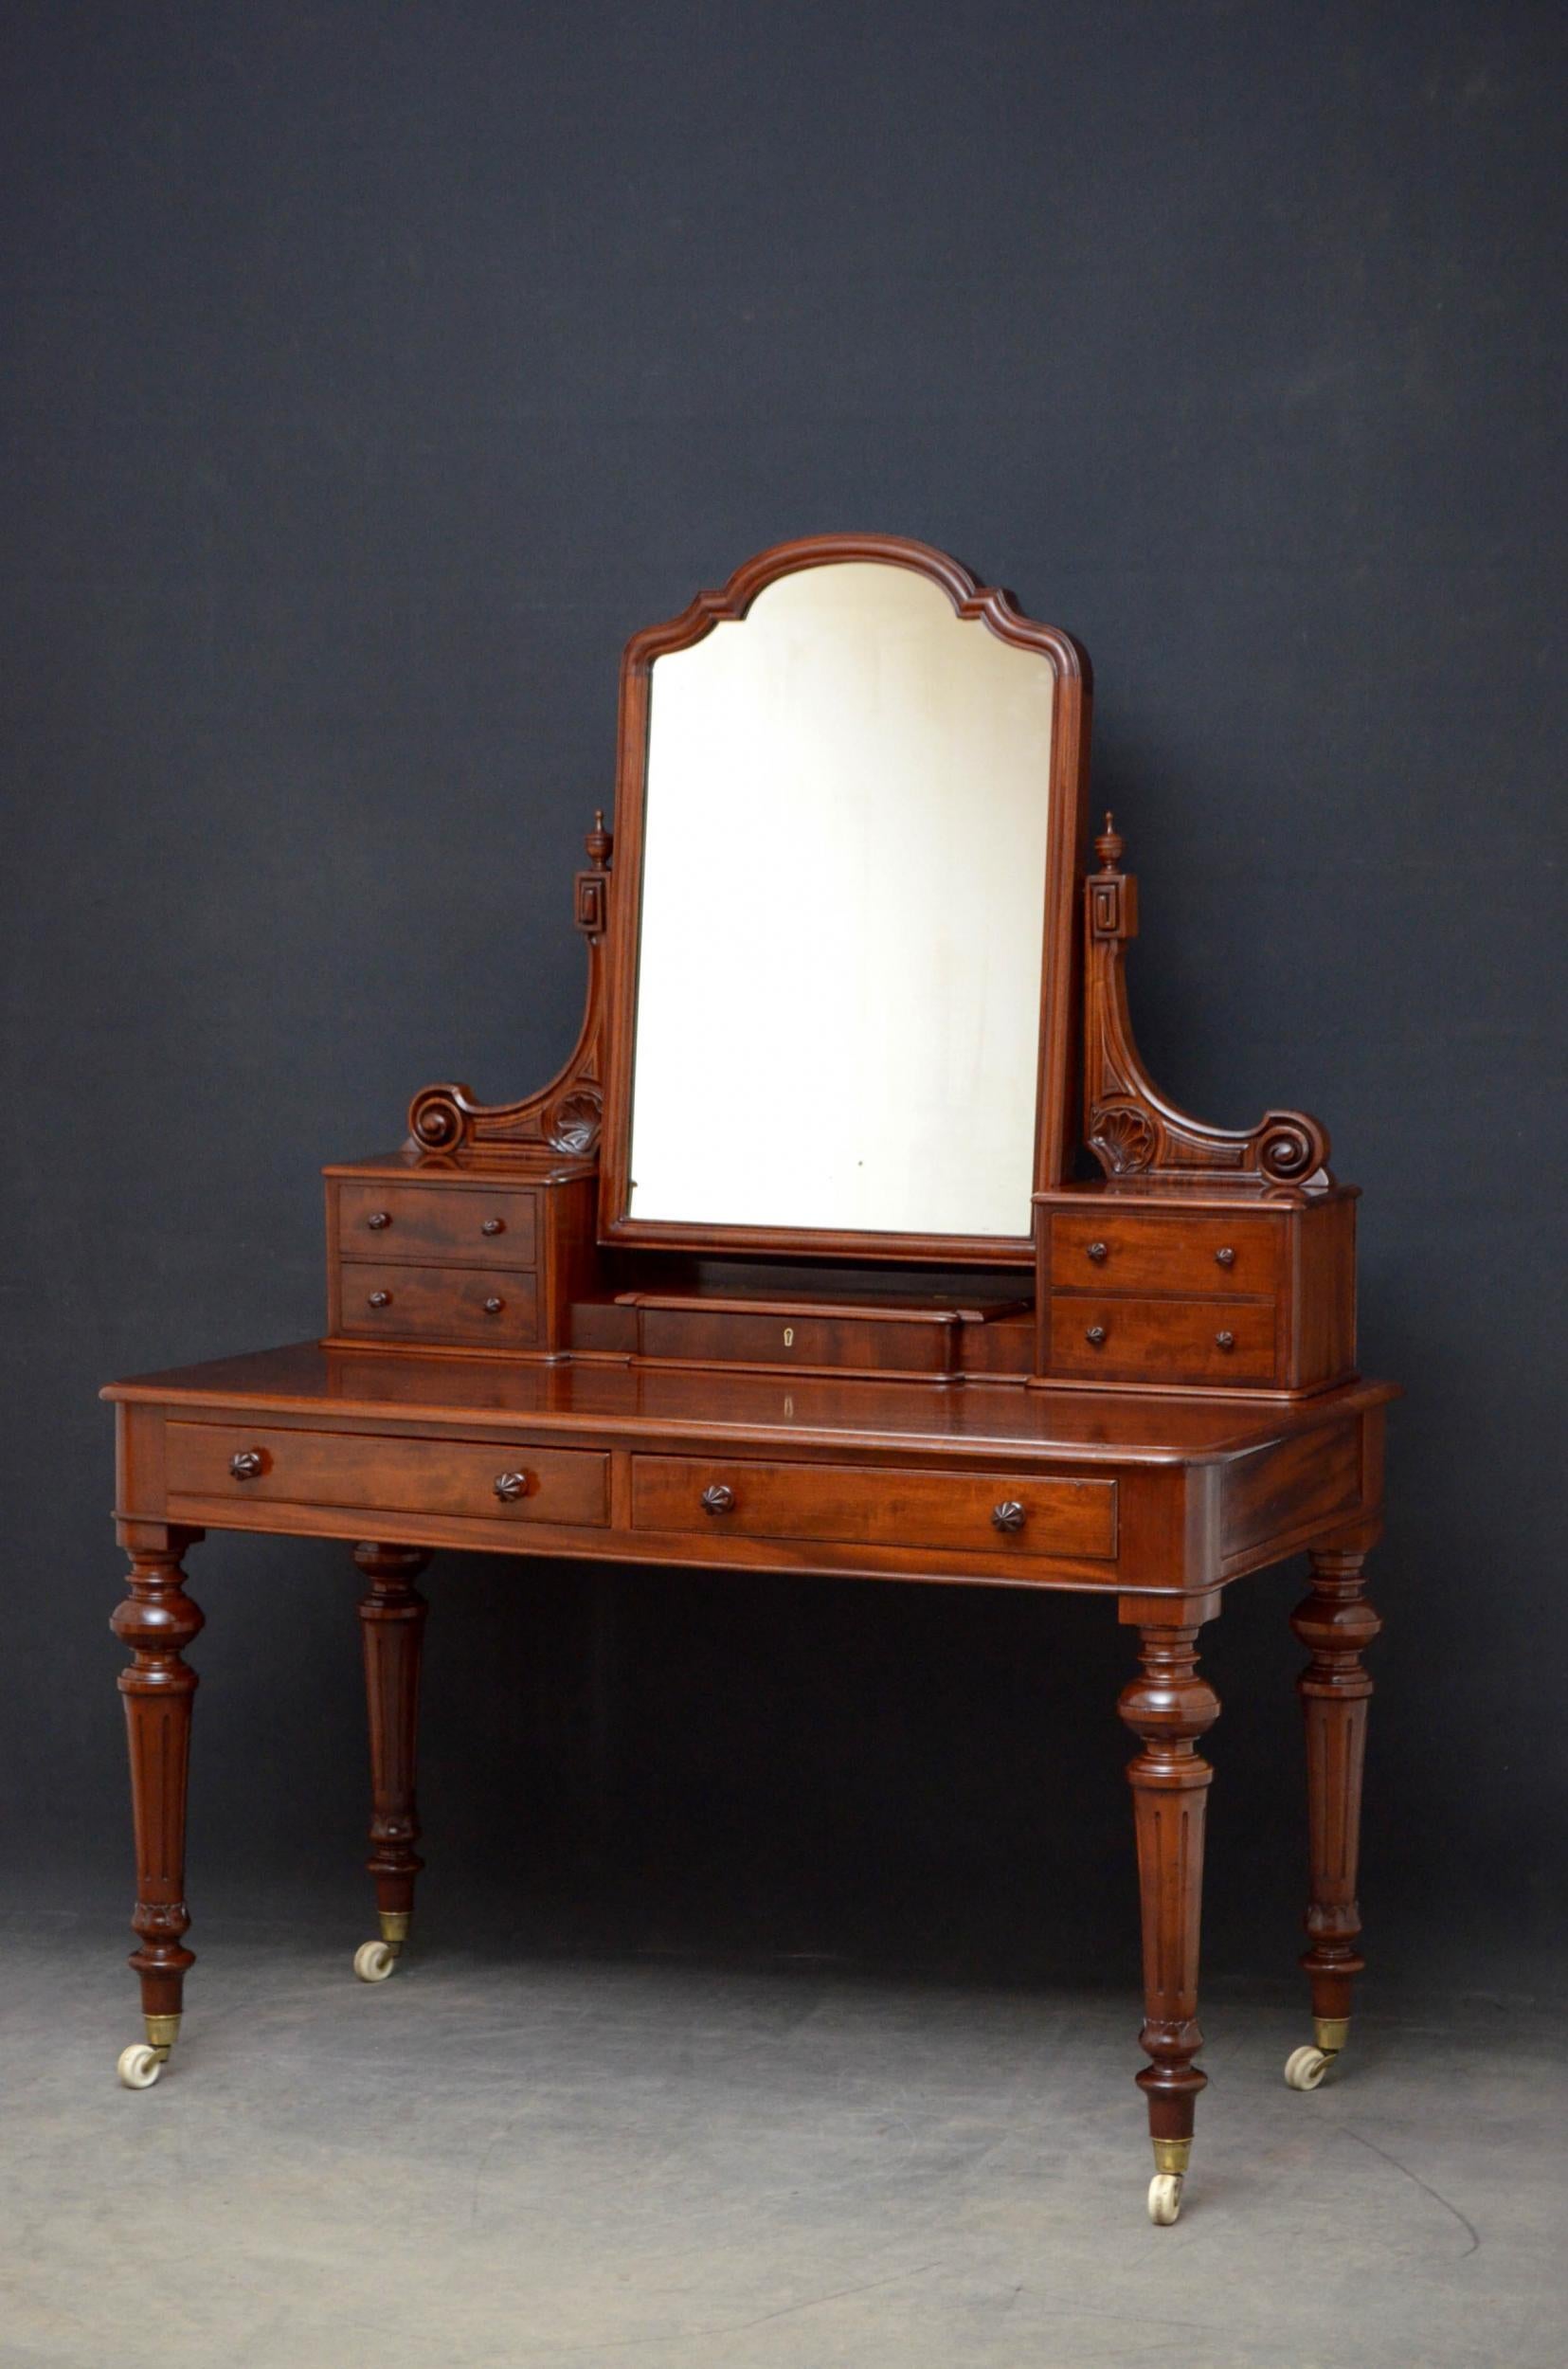 Victorian mahogany two-piece bedroom set. Sn4869 fine quality Victorian wardrobe of generous proportions, having moulded outswept cornice above a pair of arched and paneled figured mahogany doors fitted with original glass knob and enclosing short